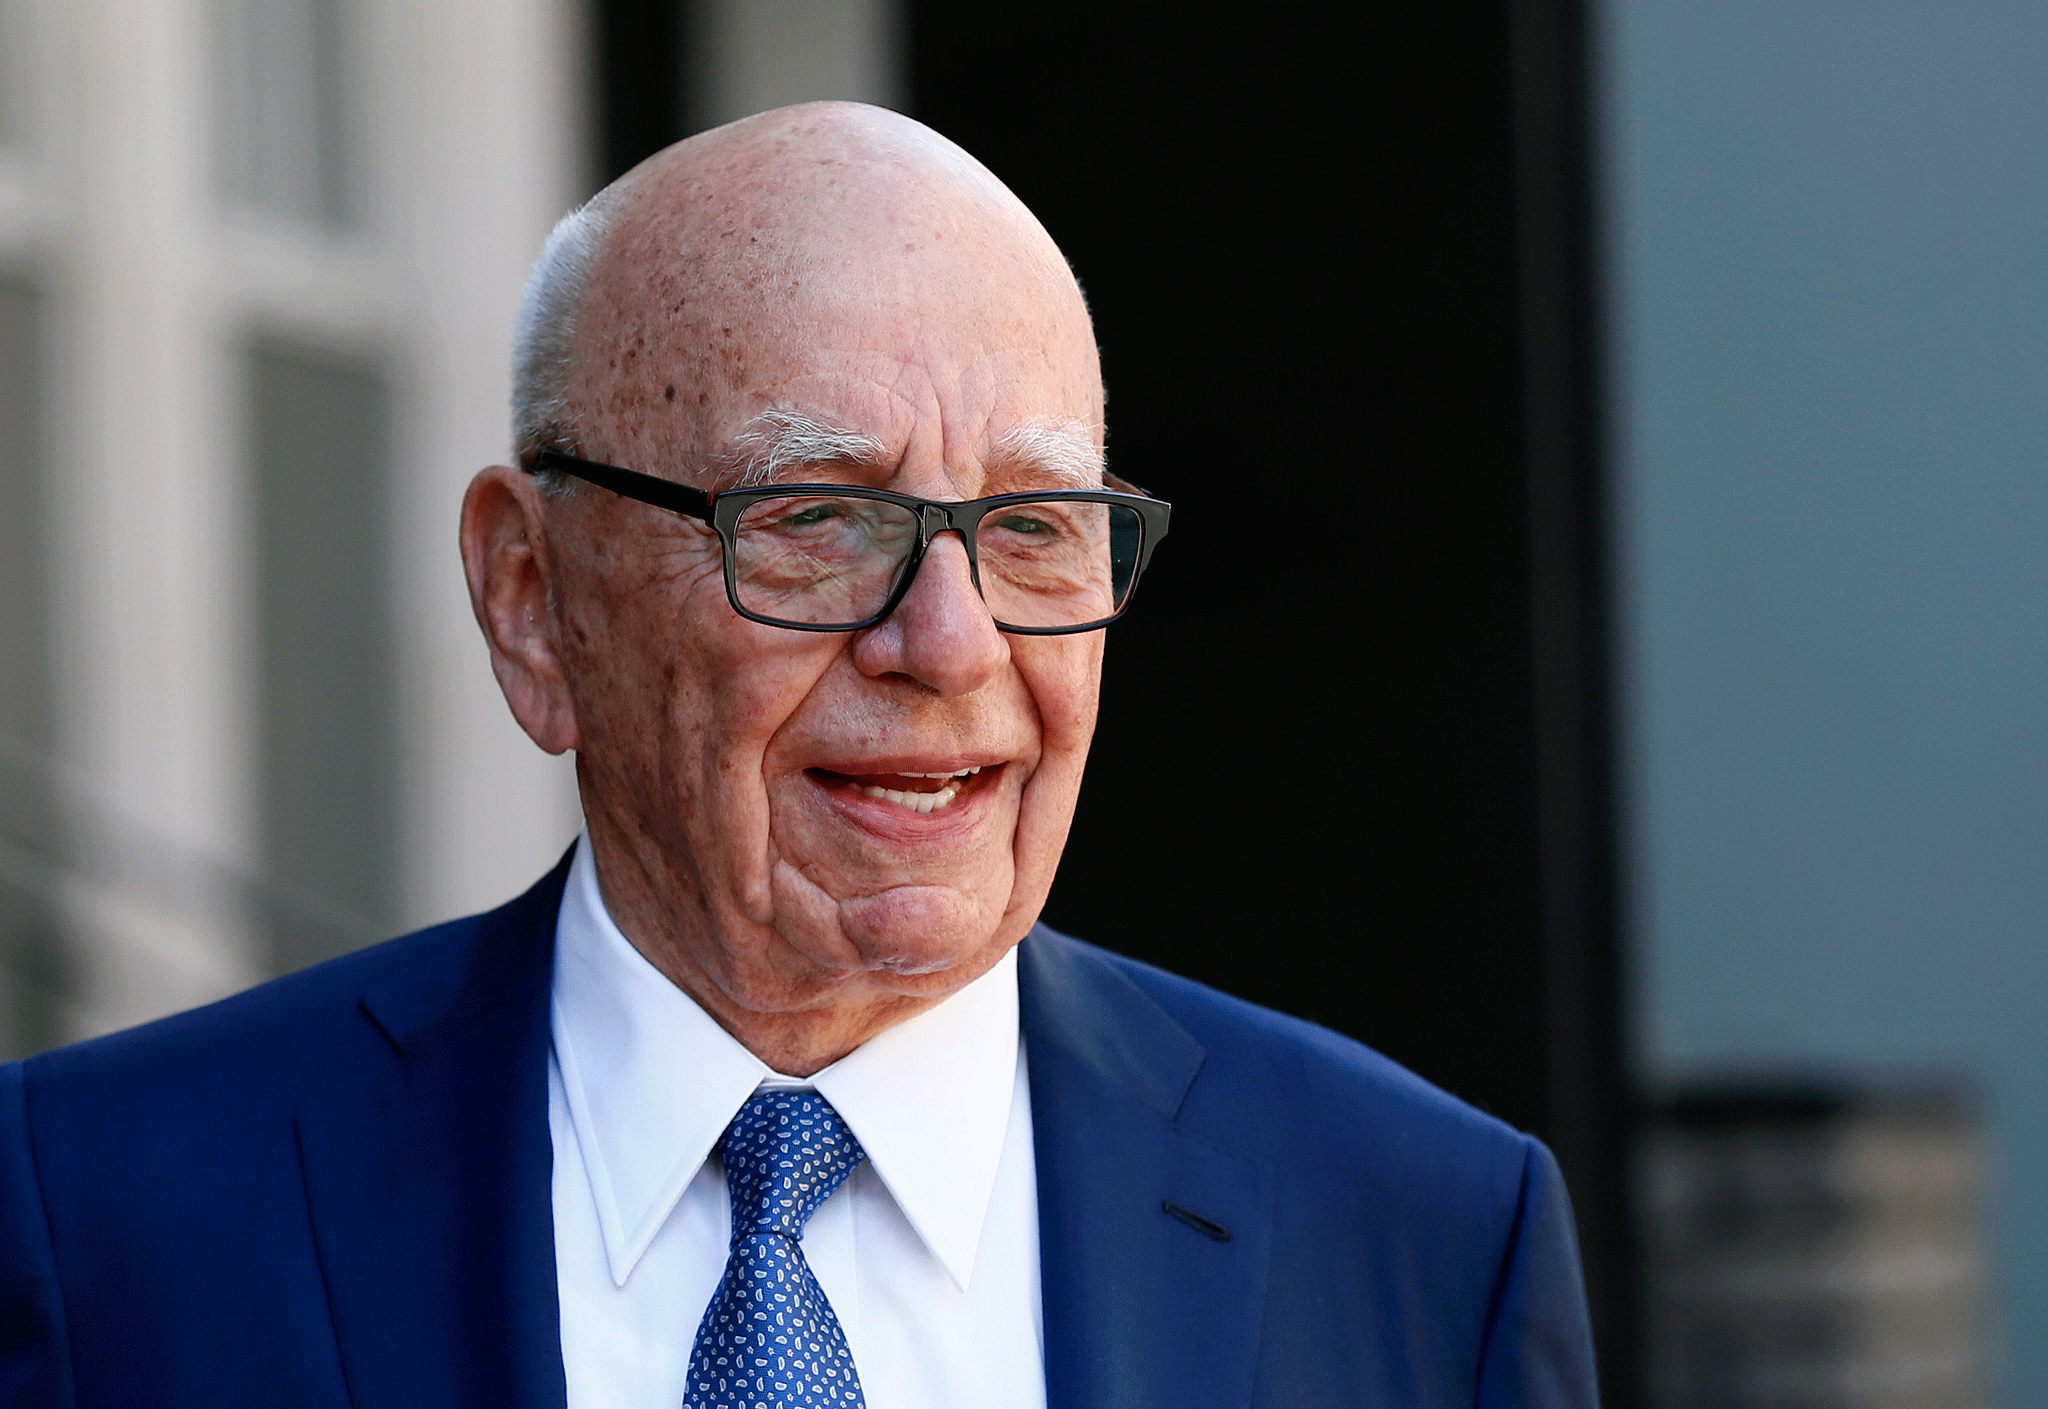 21st Century Fox's previous bid for Sky was blocked in 2011 in the wake of the phone hacking scandal